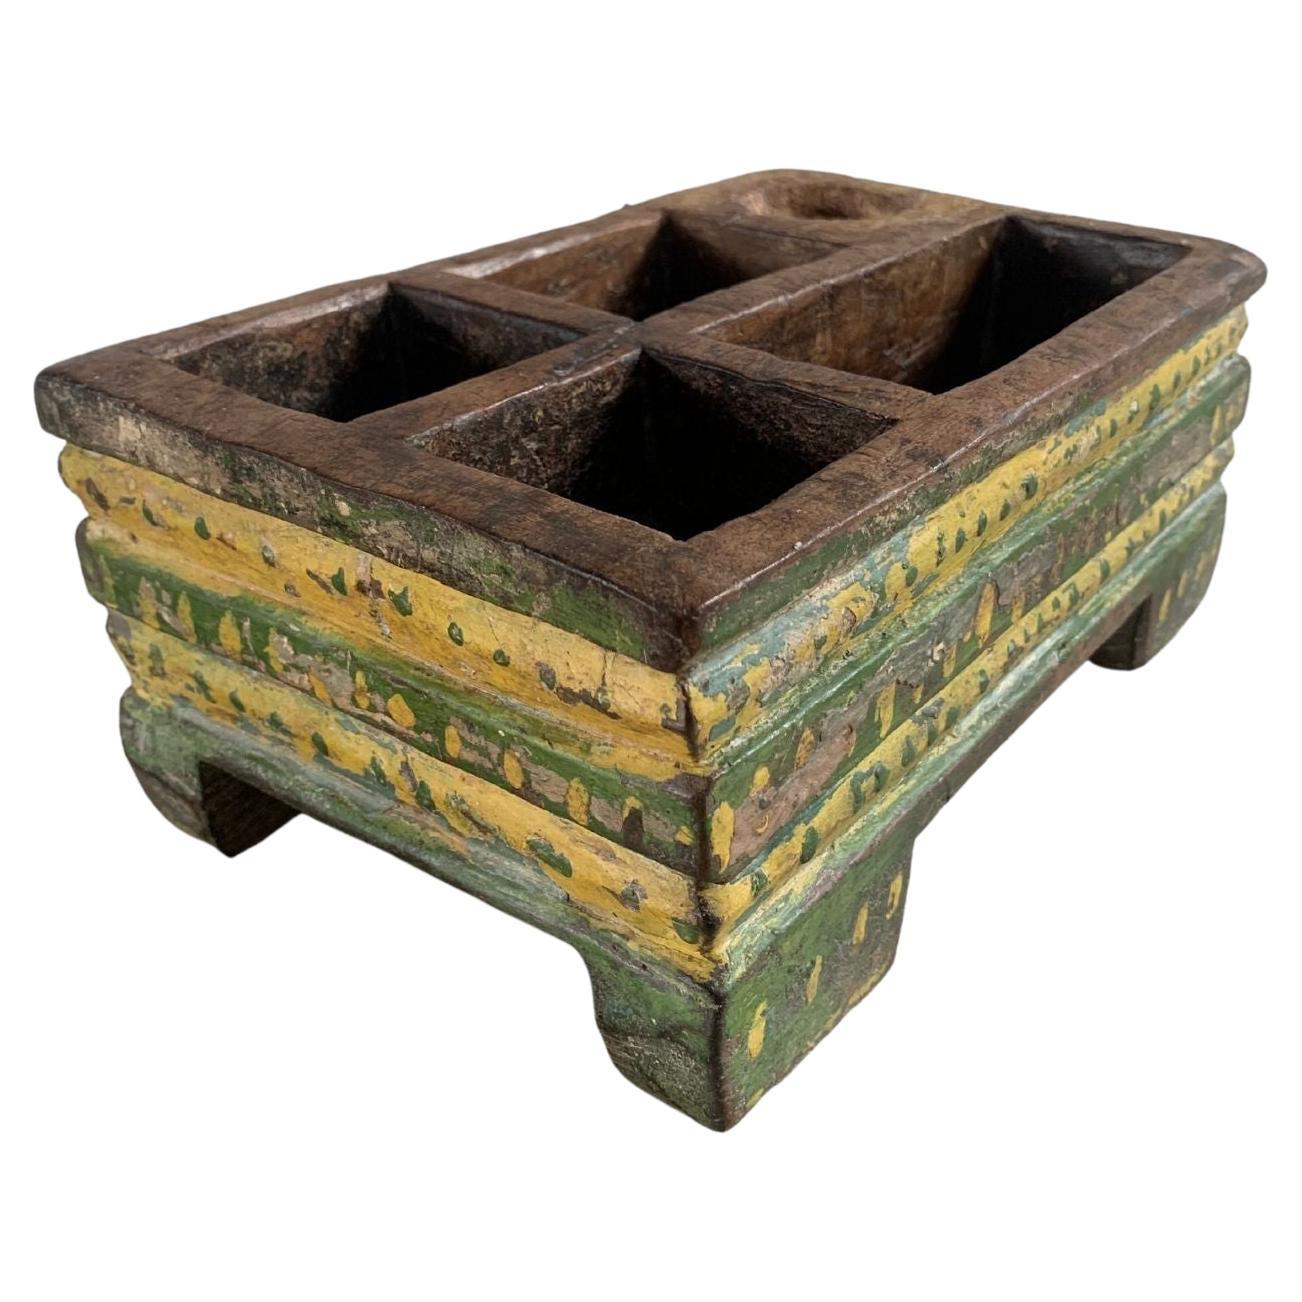 Betel Nut Box from Java with Polychromed Finish, Indonesia, c. 1900 For Sale